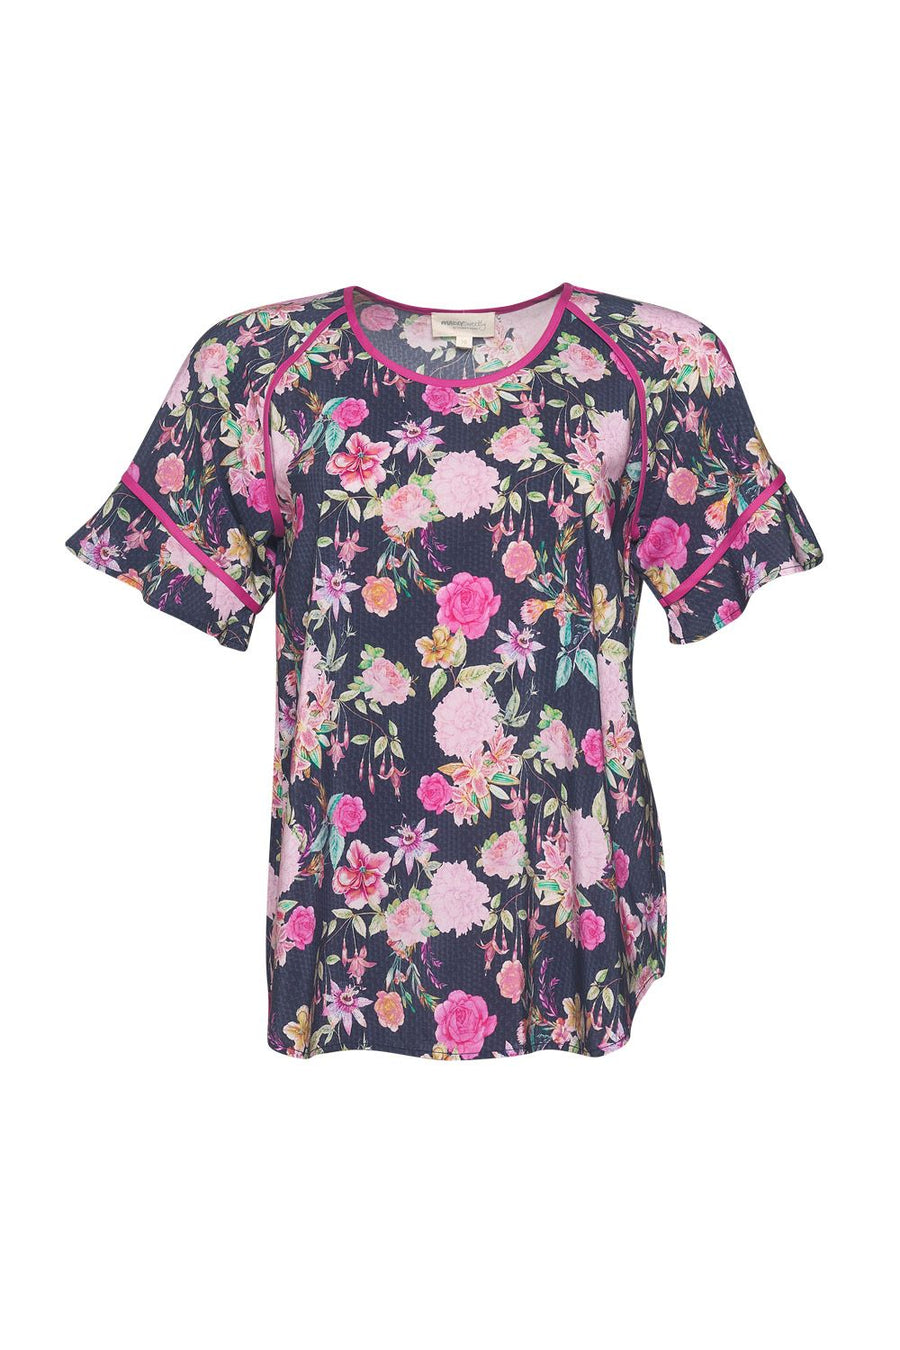 Fuchsiaristic Tee by Madly Sweetly